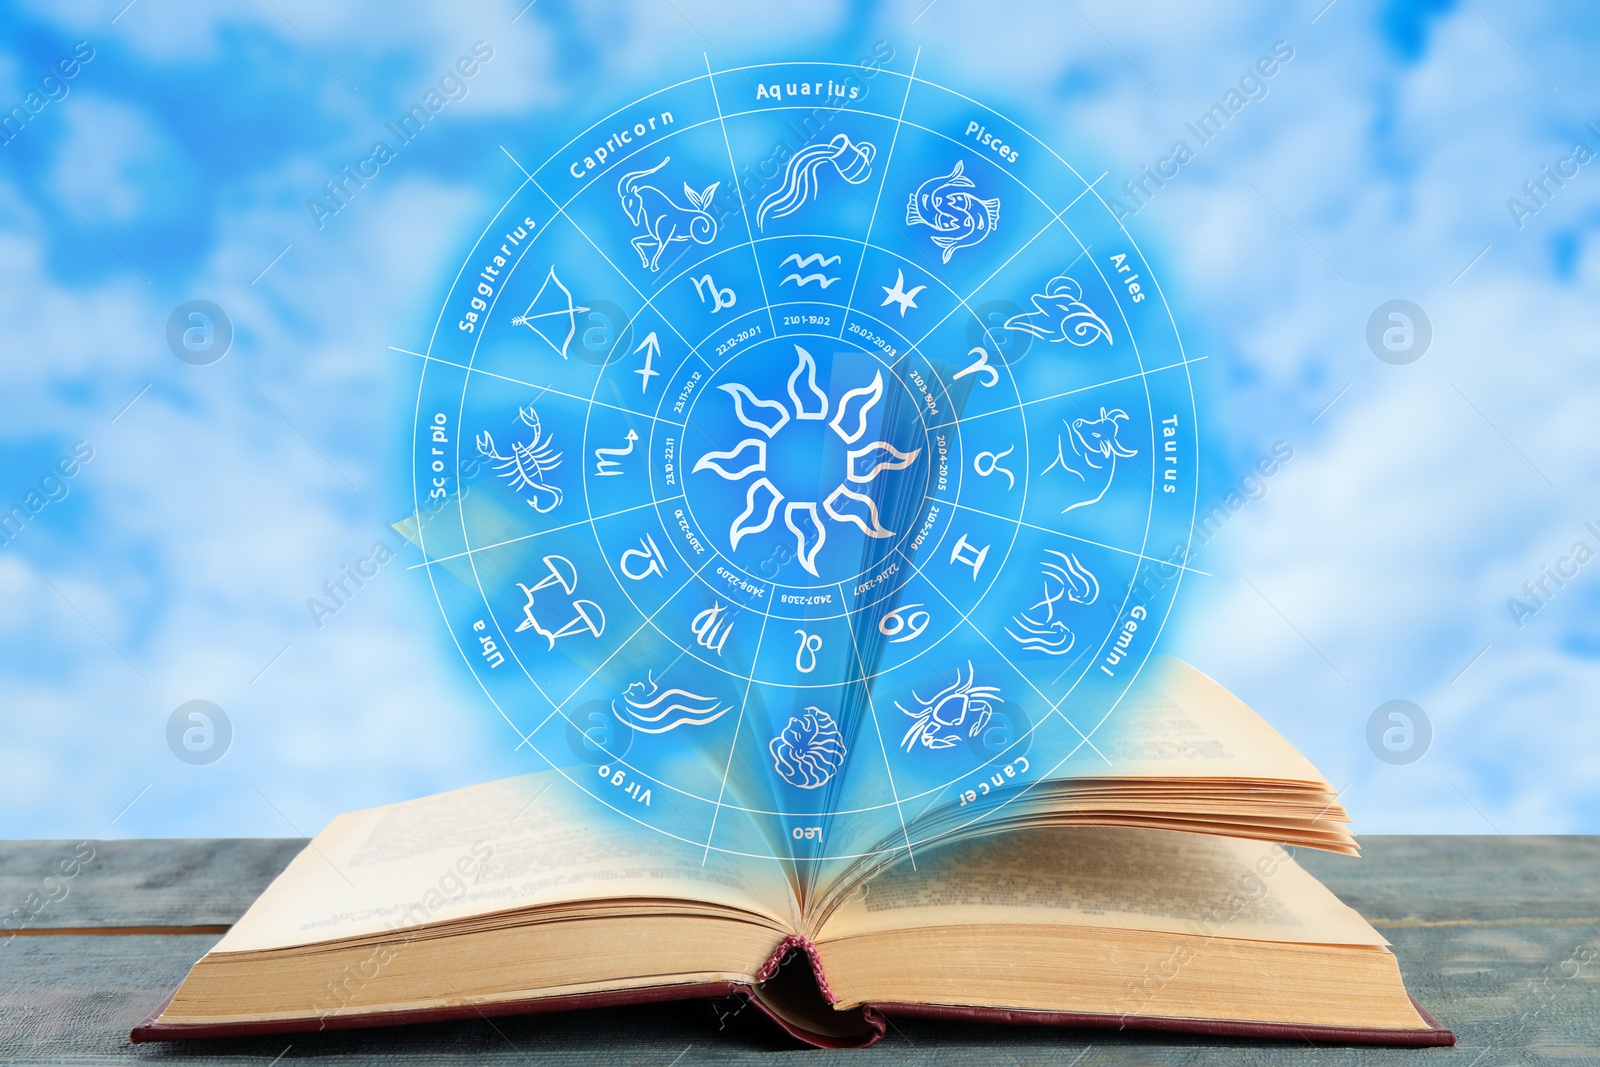 Image of Old book on wooden table and illustration of zodiac wheel with astrological signs against blue sky